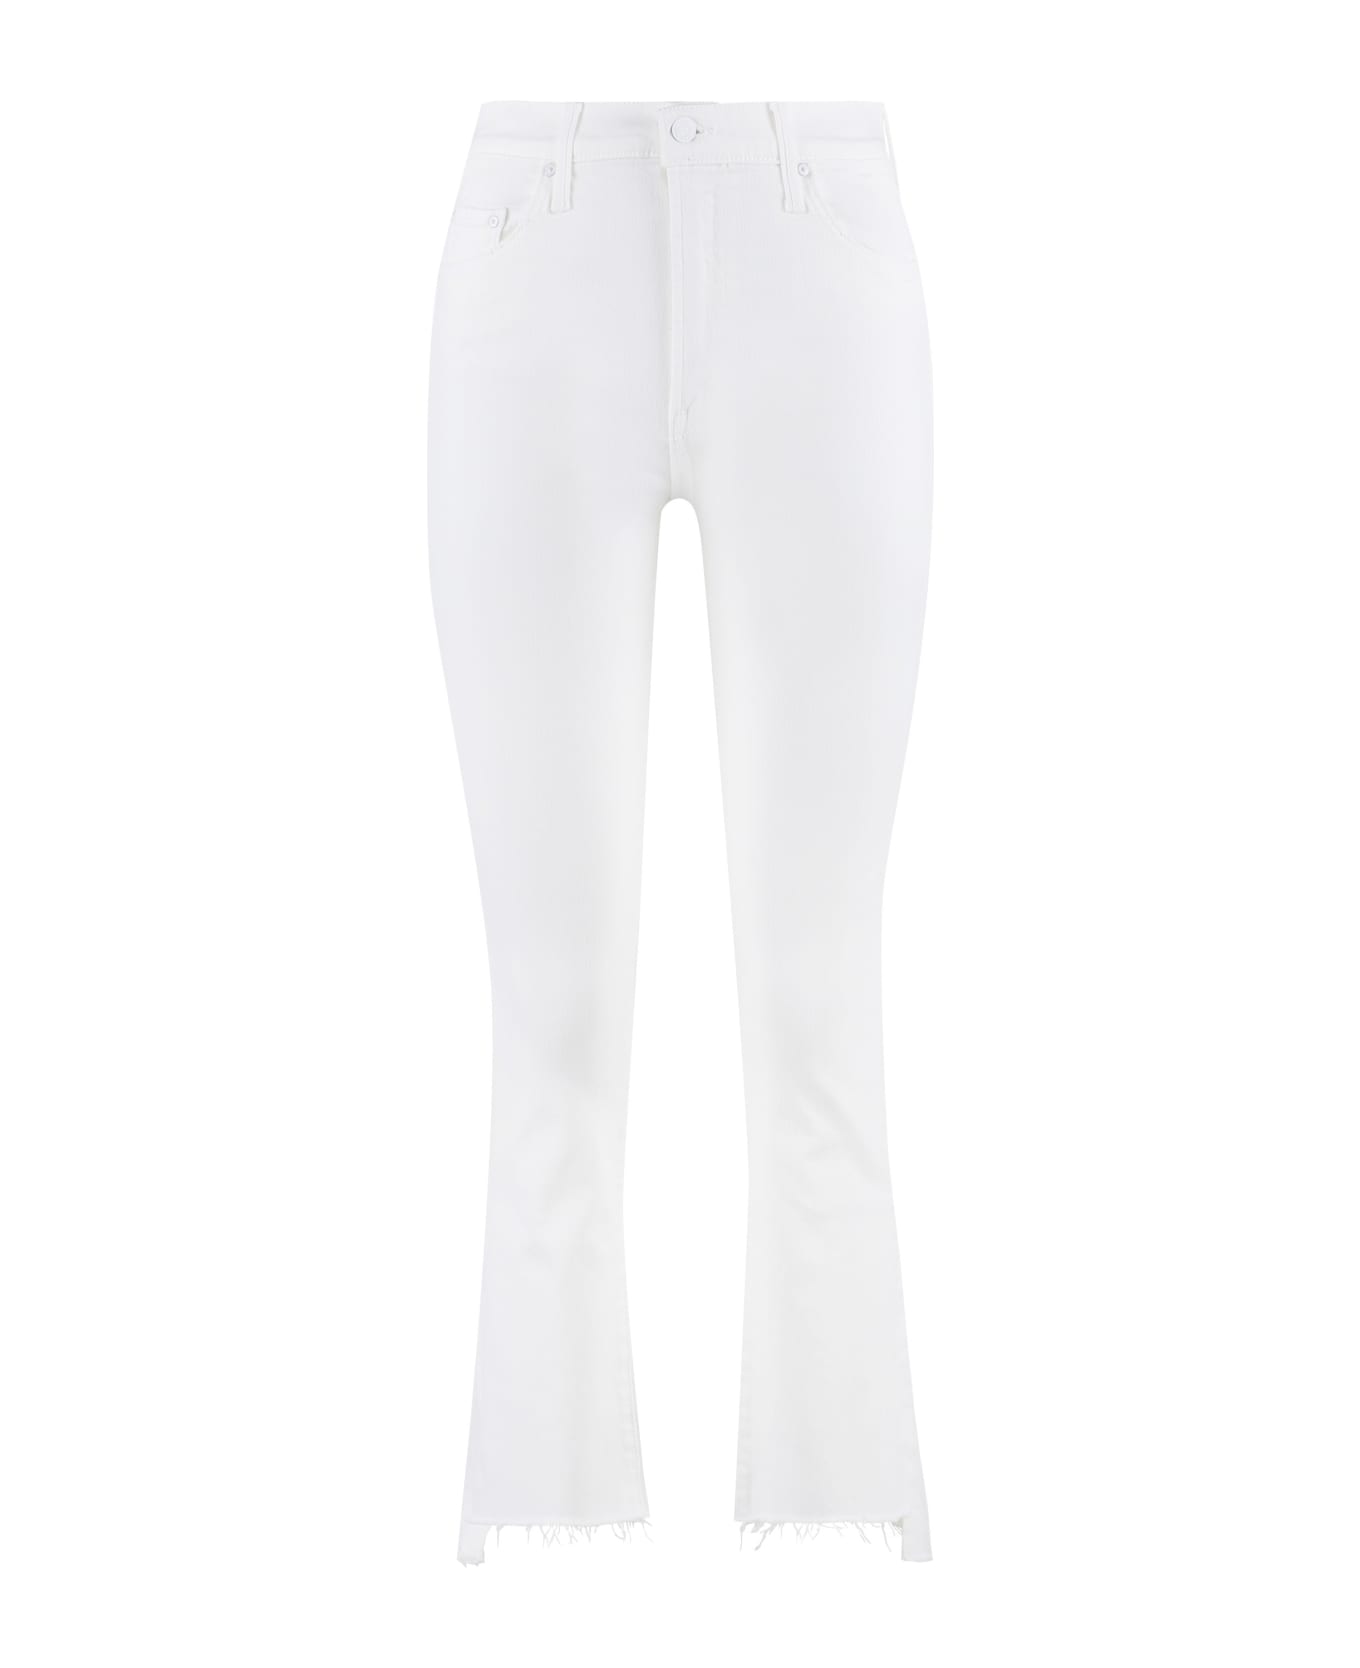 Mother The Insider Crop Step Fray Jeans - White